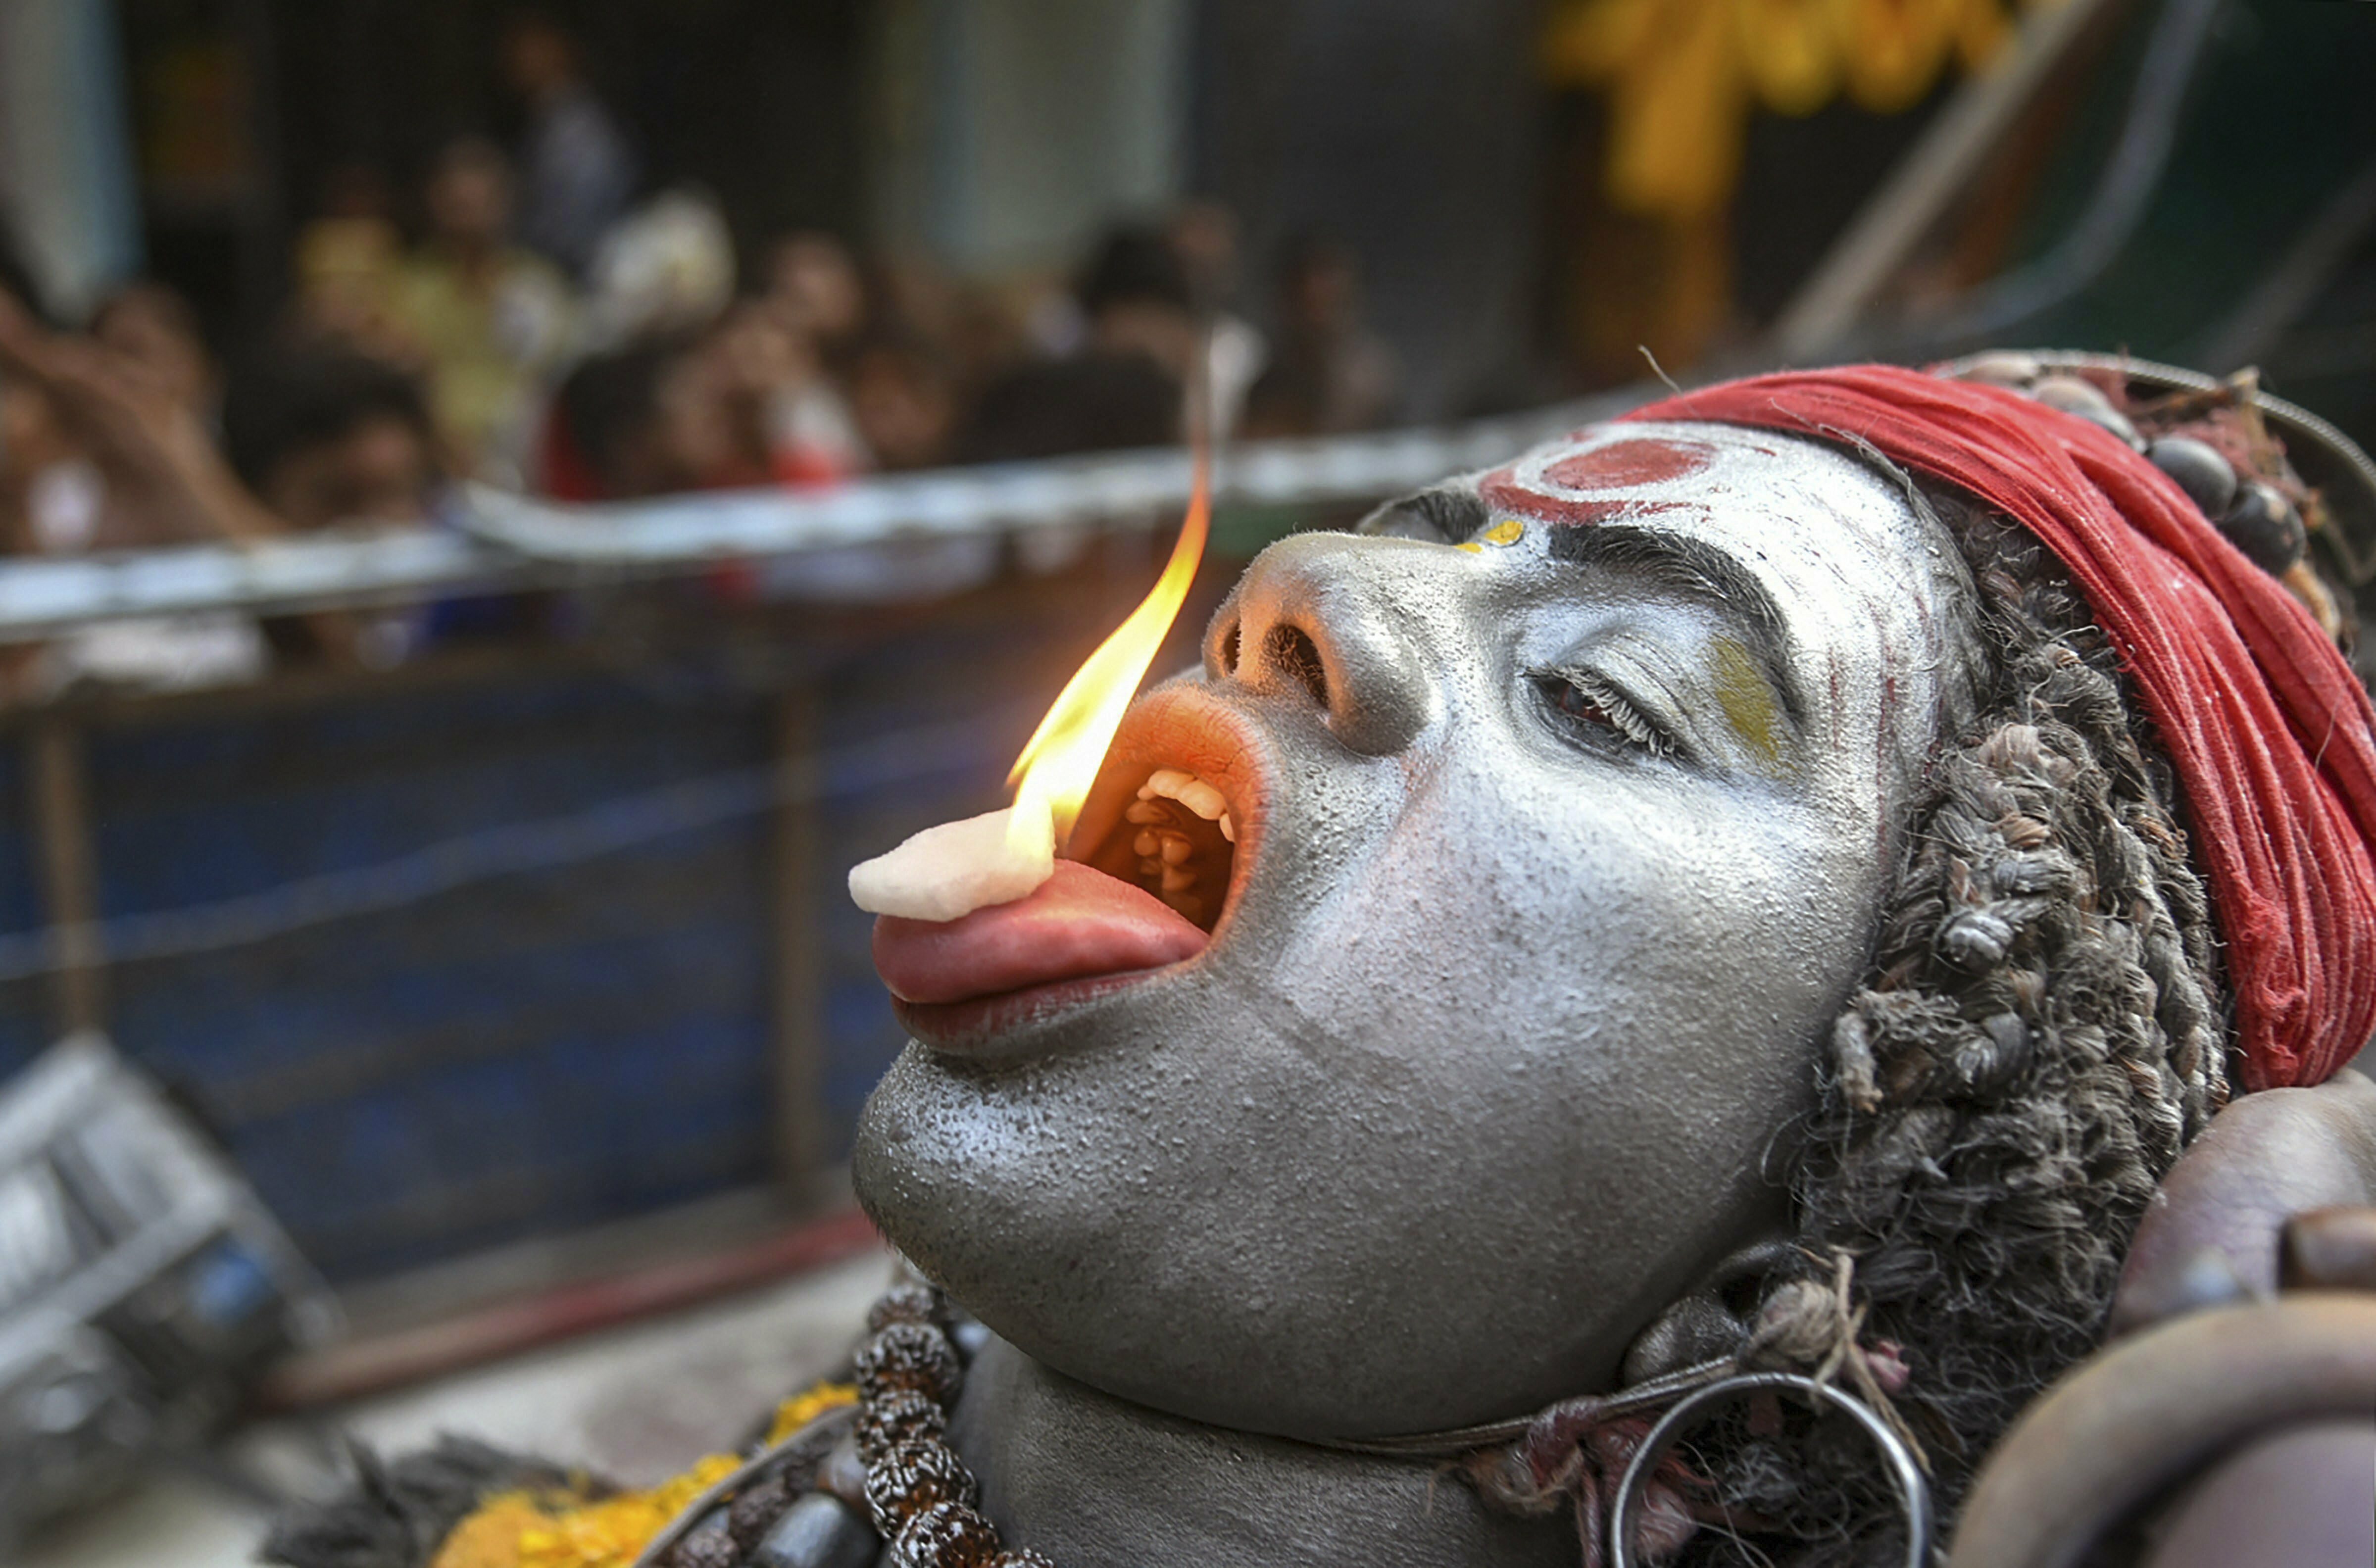 A devotee places a burning camphor on his tongue as he participates in a Shiv Baraat procession on the occasion of 'Maha Shivratari' festival, in Allahabad - PTI